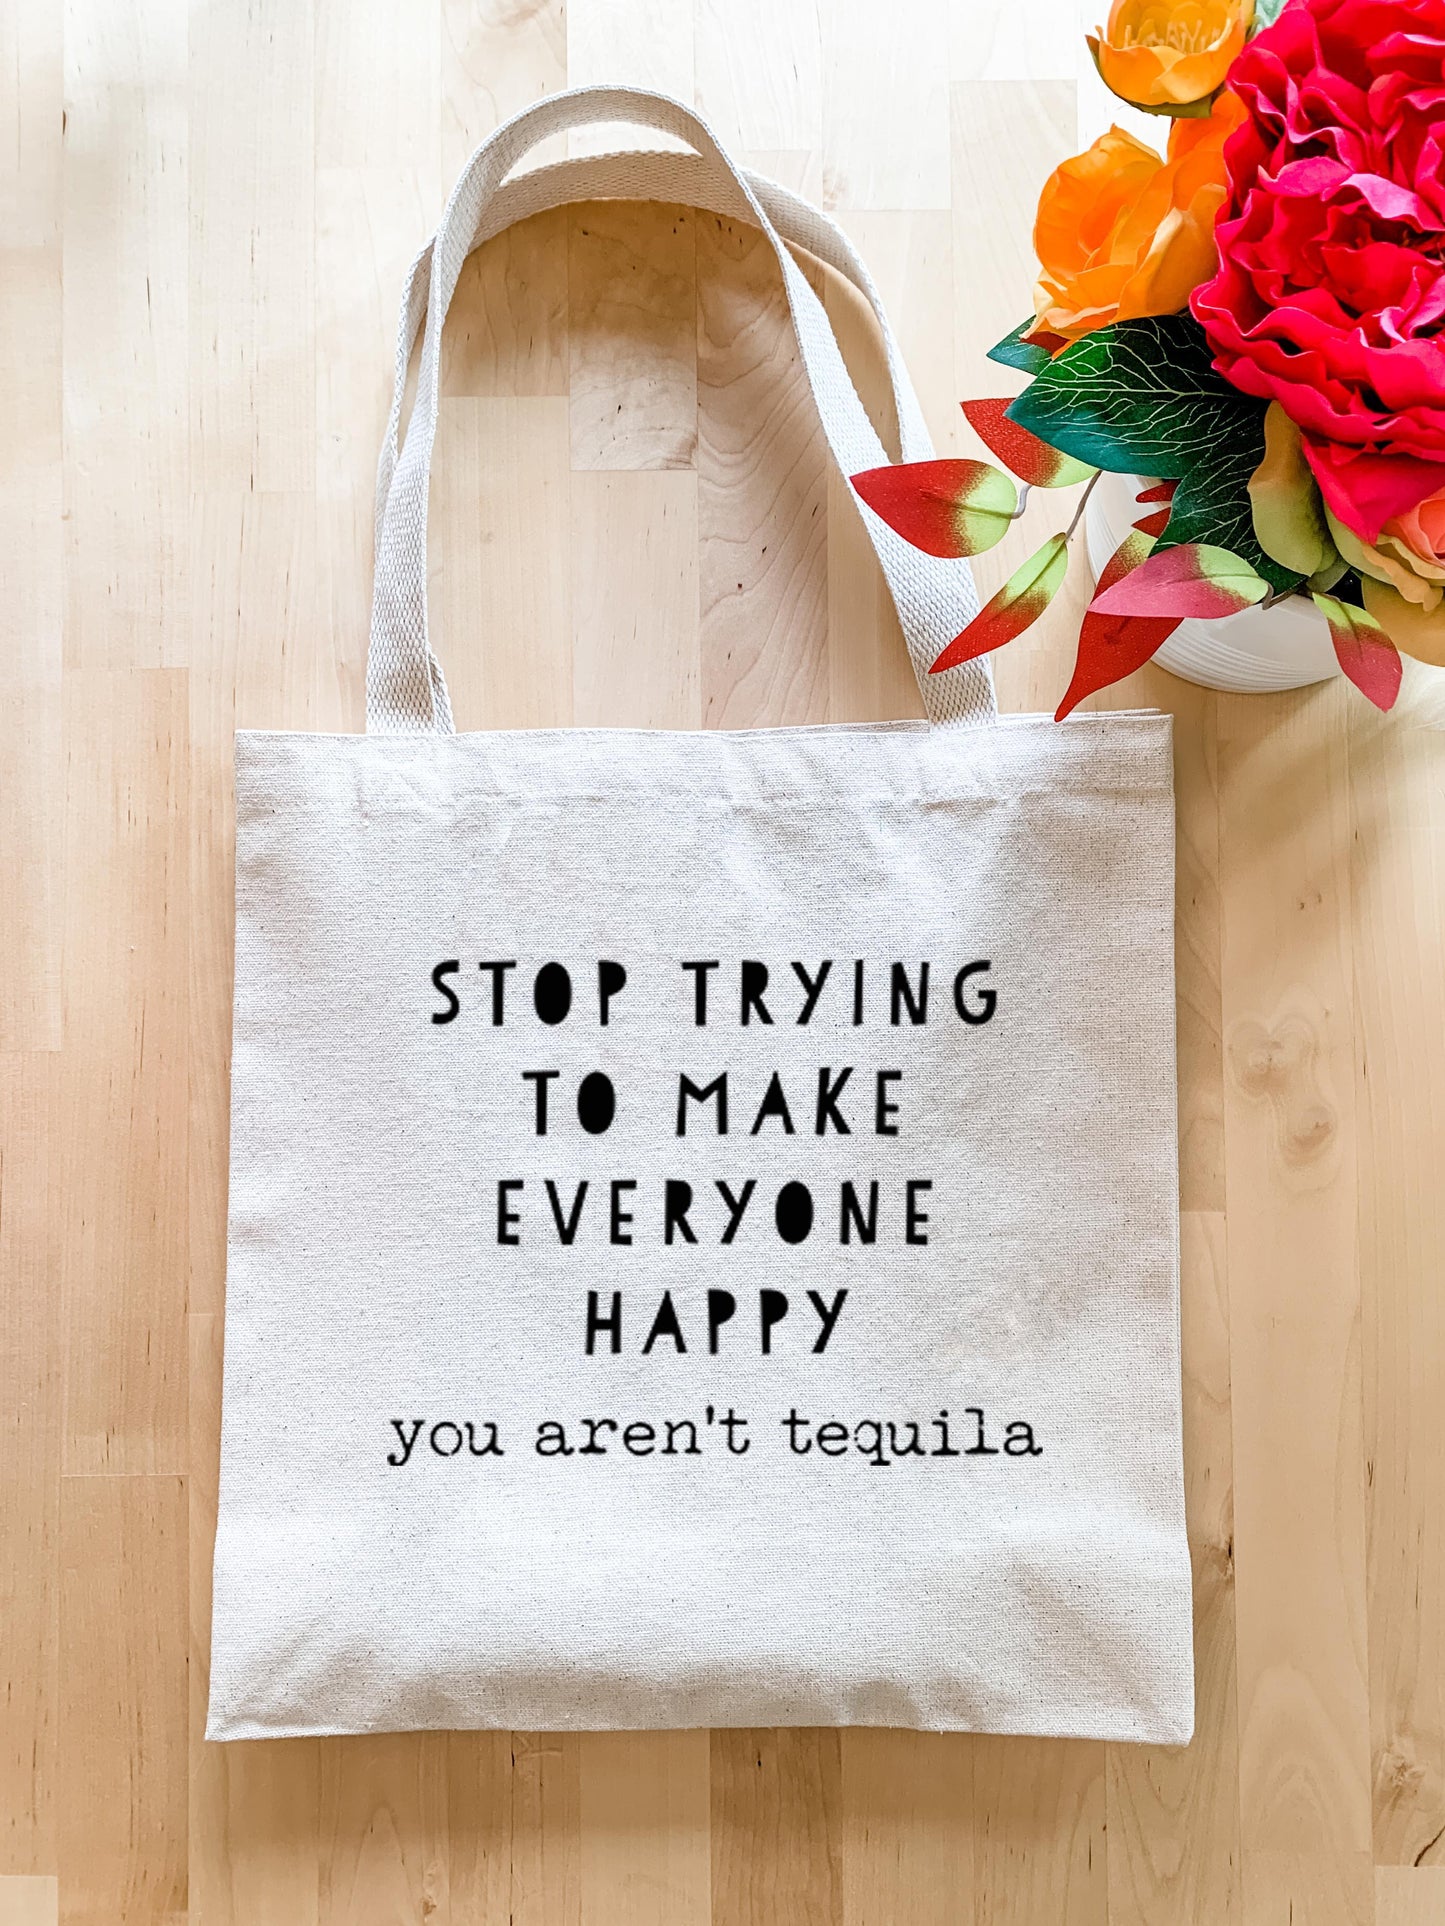 Stop Trying To Make Everyone Happy (you aren't tequila) - Tote Bag - MoonlightMakers